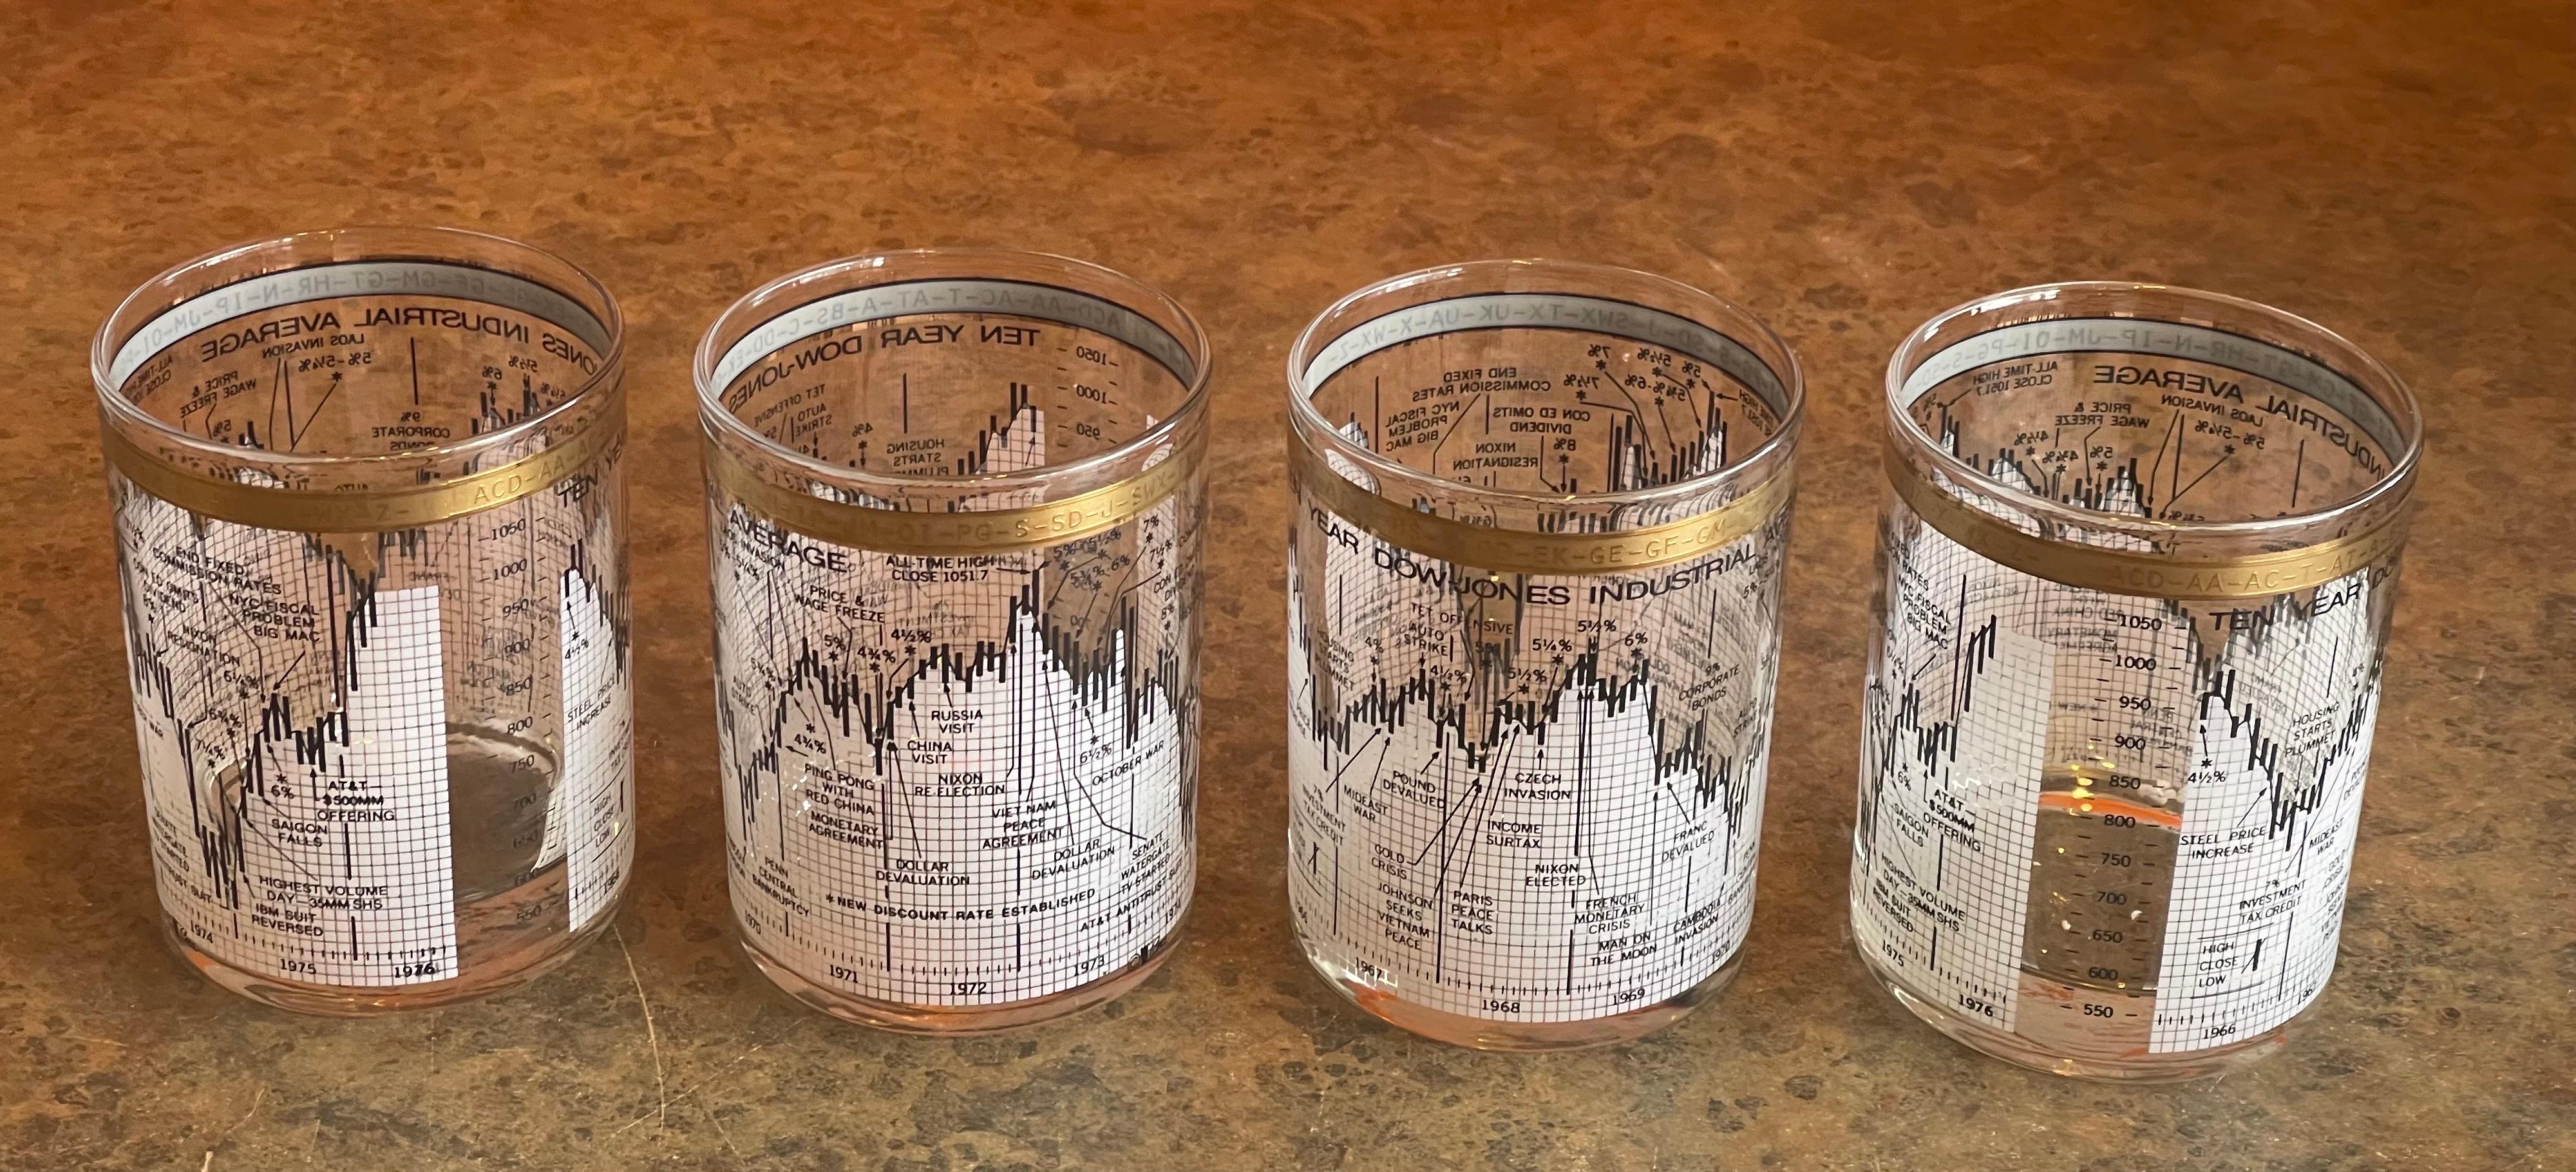 Great set of four double old fashioned glasses tracking the Dow Jones Industrial Average (DJIA) from 1958 to 1968 by Cera, circa 1970s. Each glass is the same and captures 10 years of current events and their impact on the stock market. The glasses